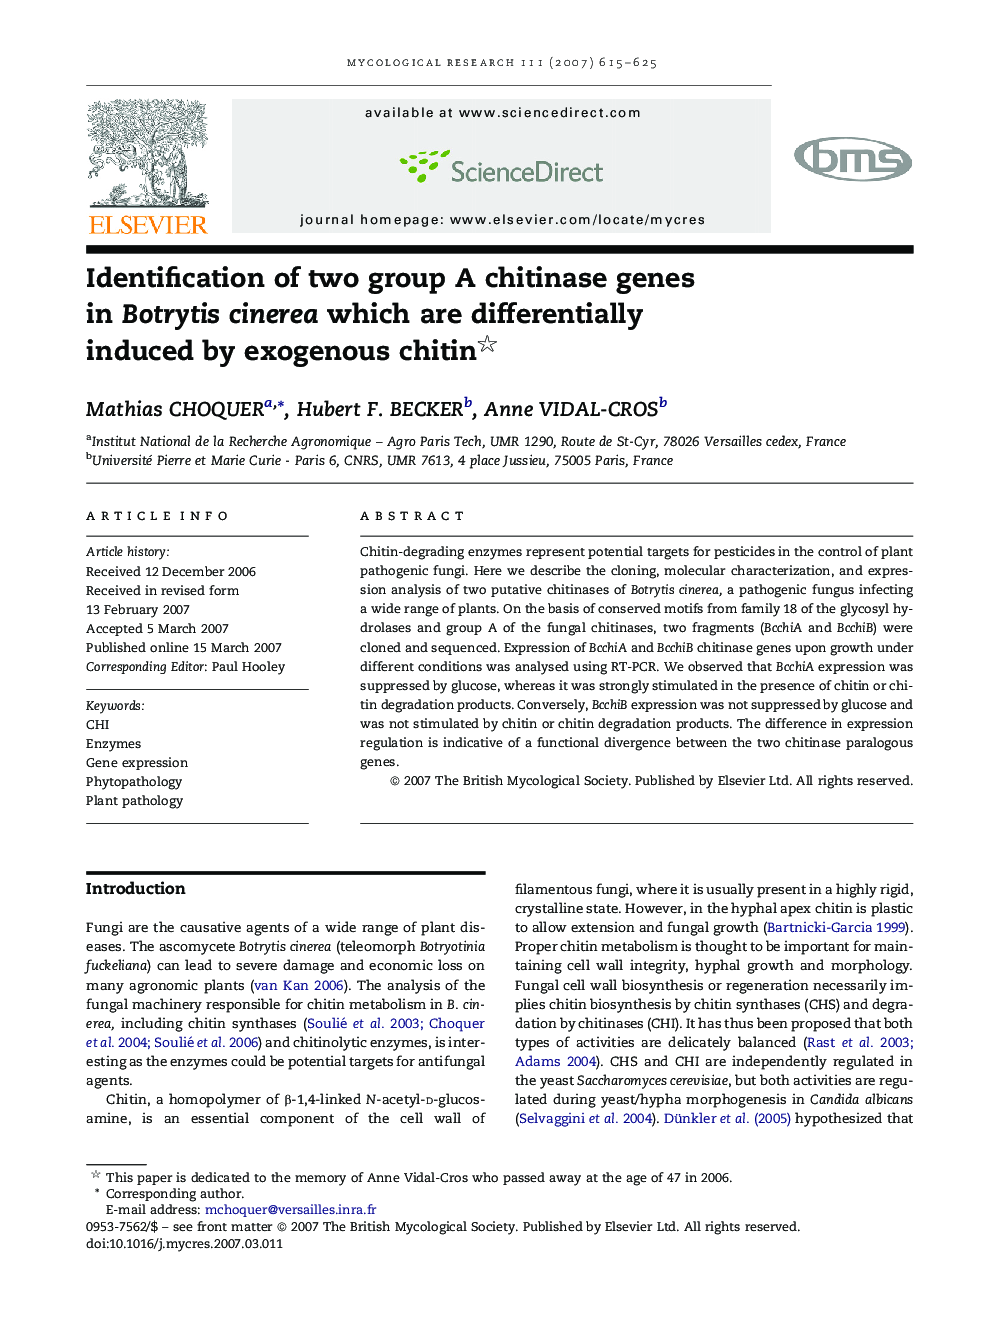 Identification of two group A chitinase genes in Botrytis cinerea which are differentially induced by exogenous chitin 